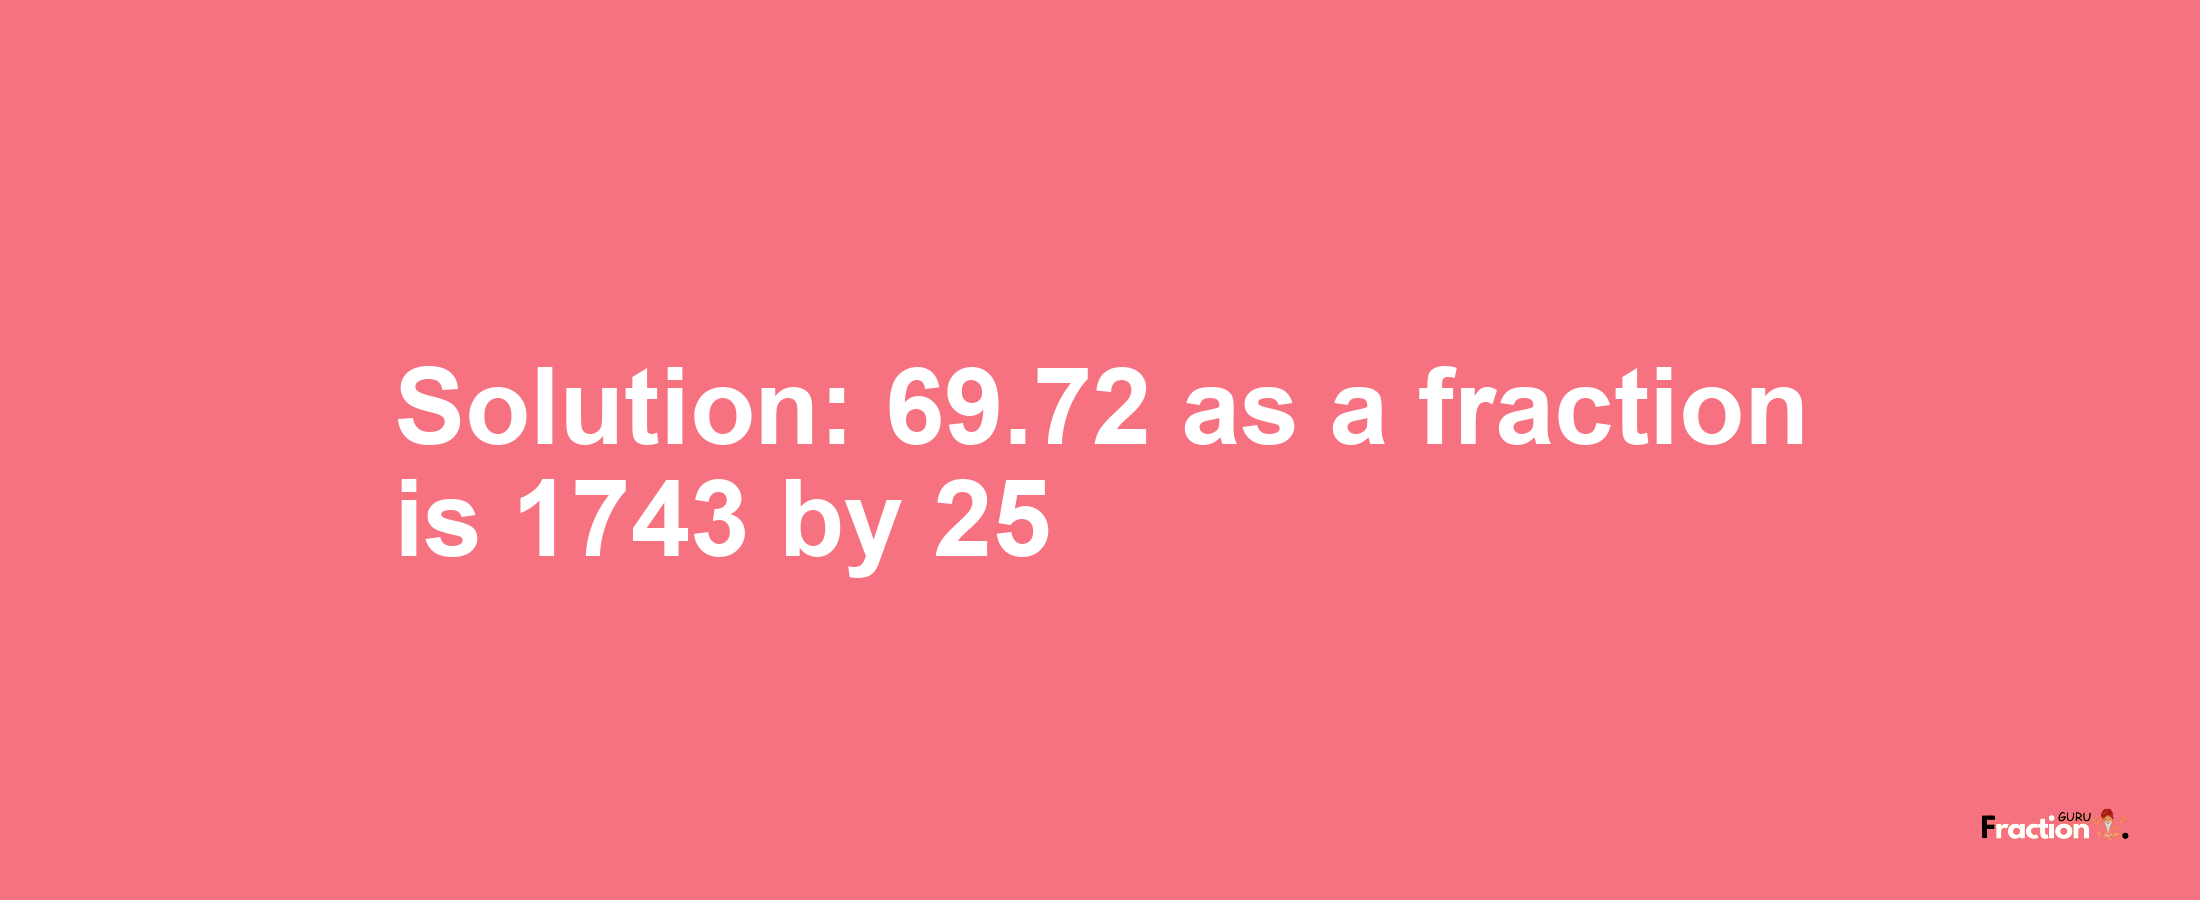 Solution:69.72 as a fraction is 1743/25